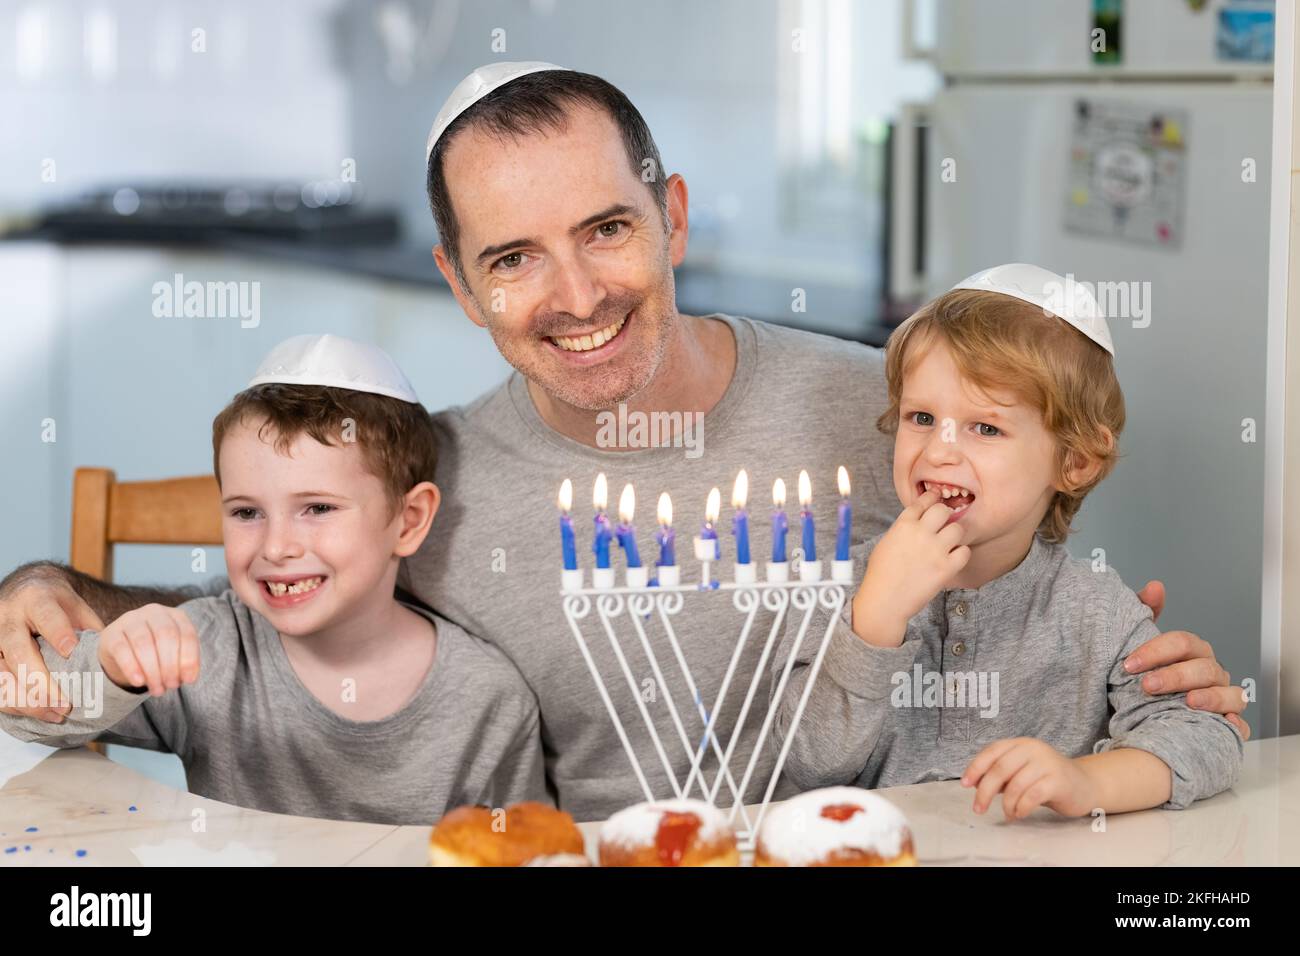 Father and sons with menorah celebrate hanukkah - Jewish religious holiday Stock Photo